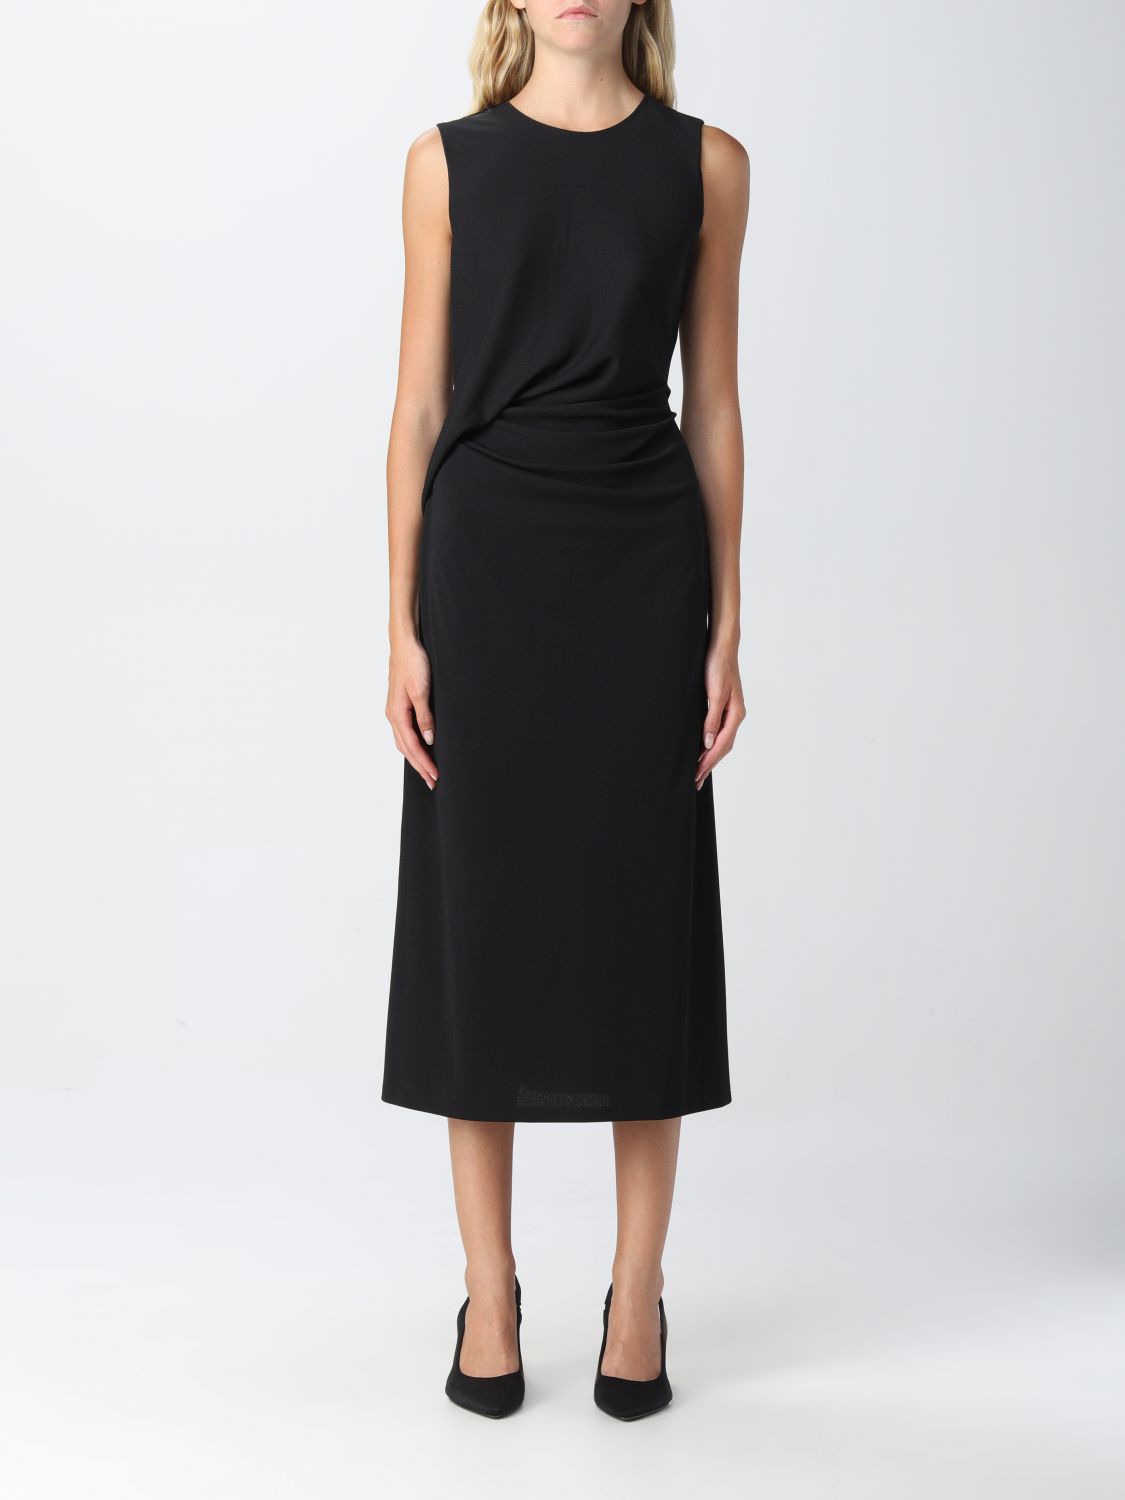 THEORY: dress for woman - Black | Theory dress M0725607 online on ...